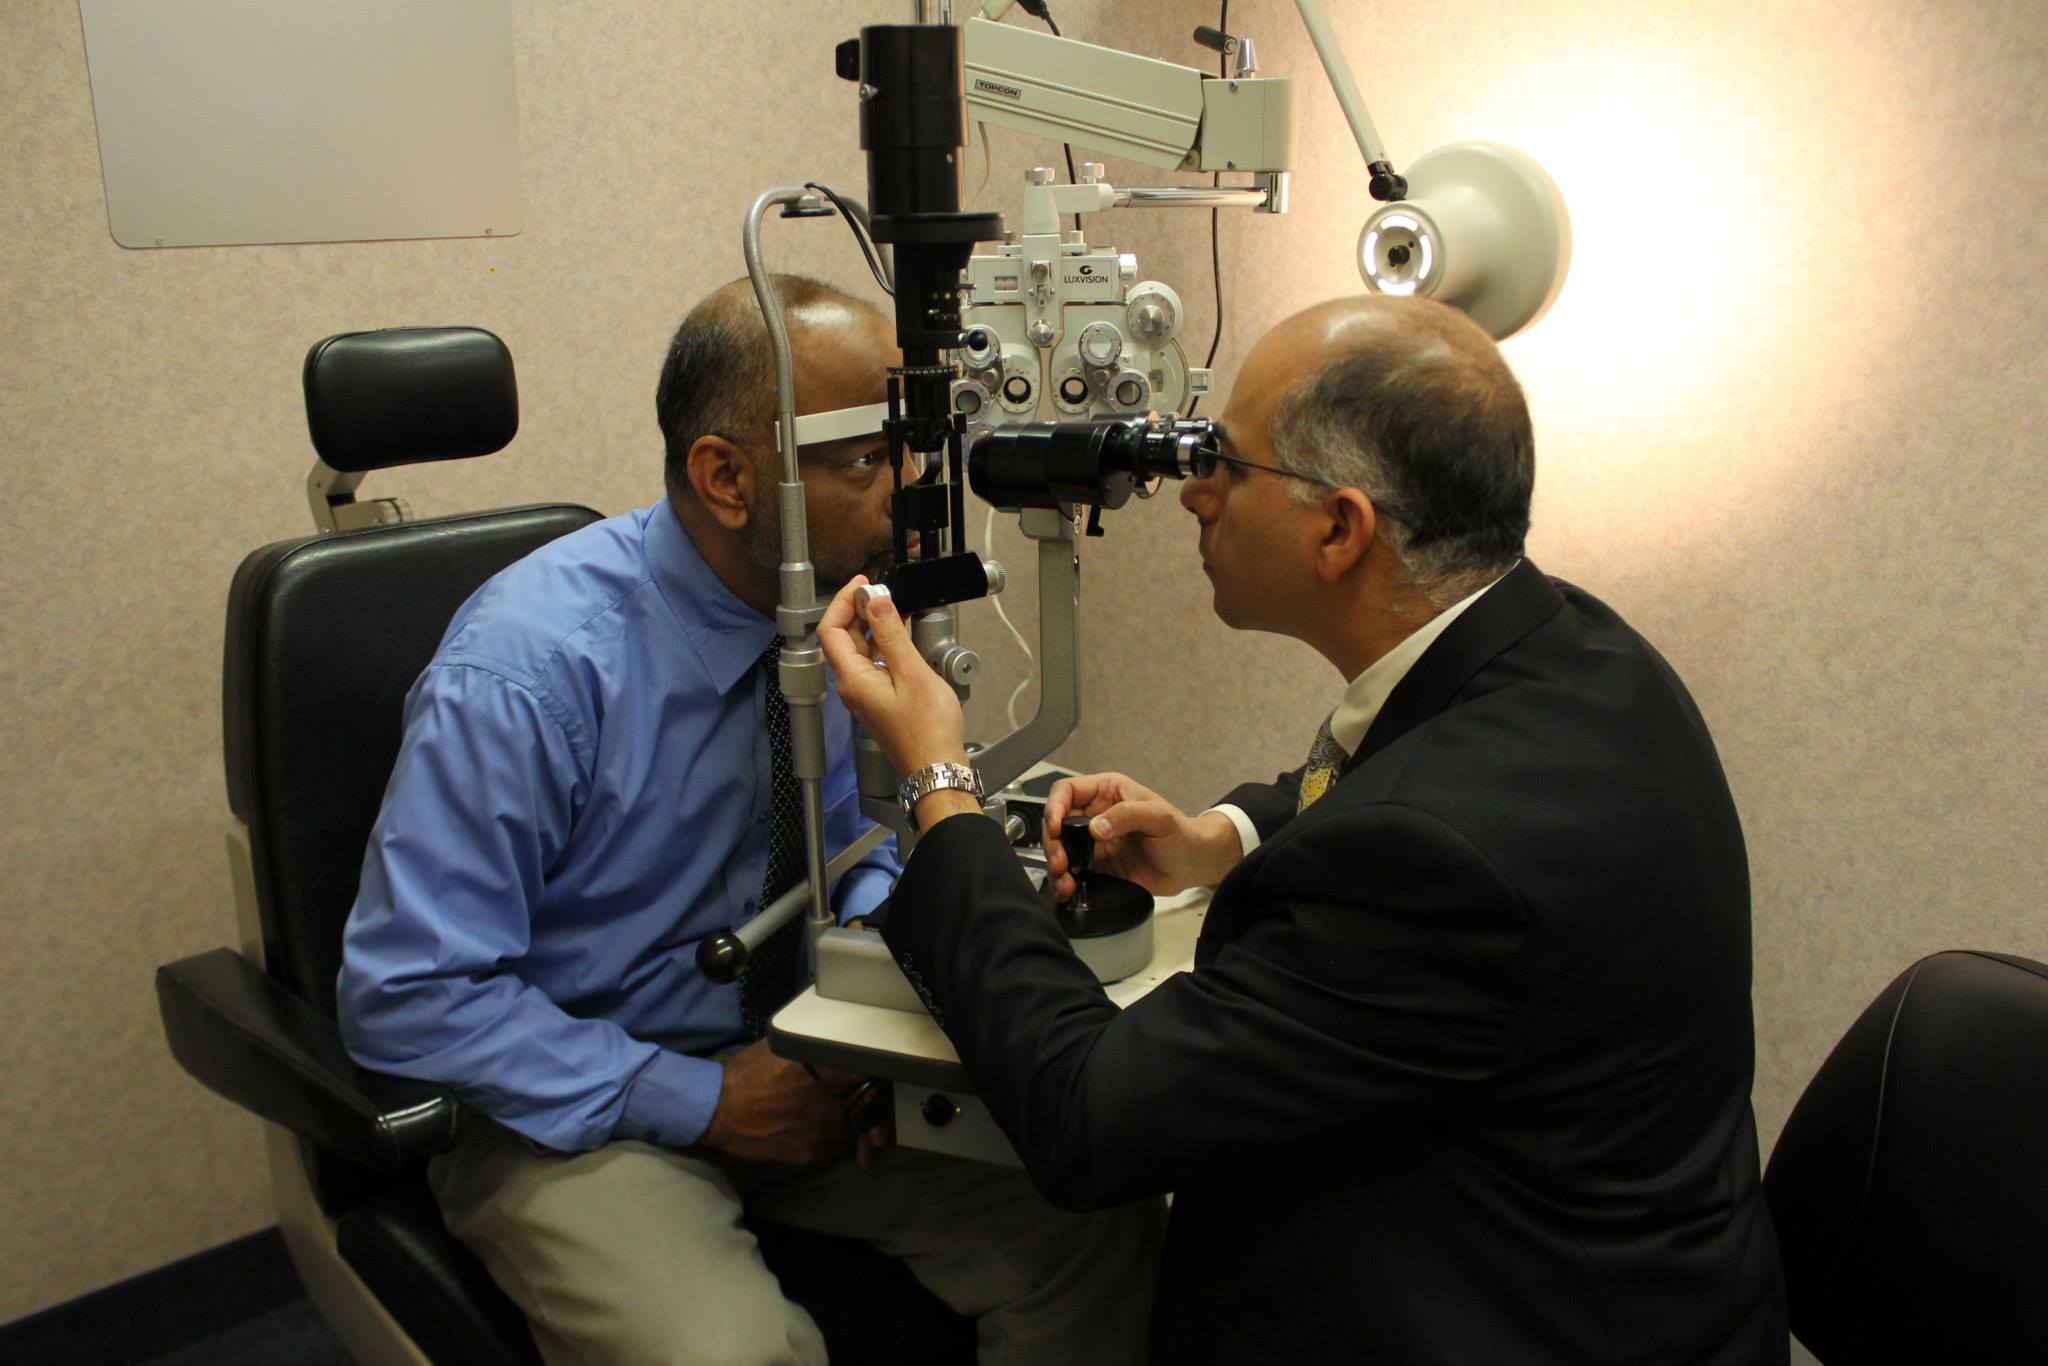 Dr. Moussa conducting an eye exam on a patient